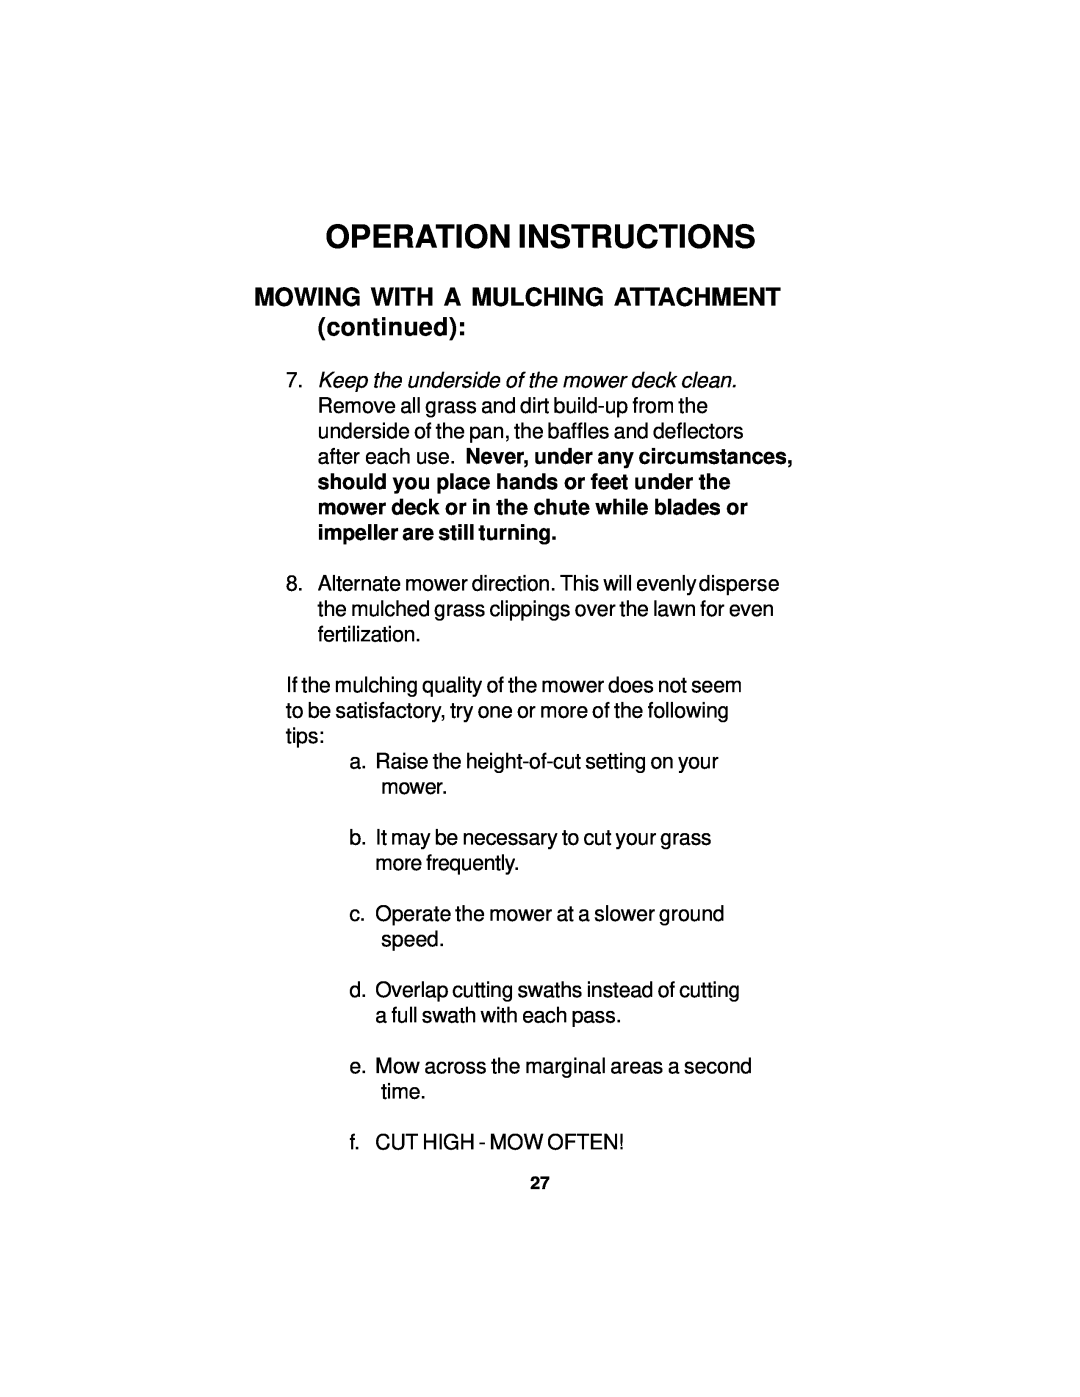 Dixon 14295-0804 manual MOWING WITH A MULCHING ATTACHMENT continued, Operation Instructions 